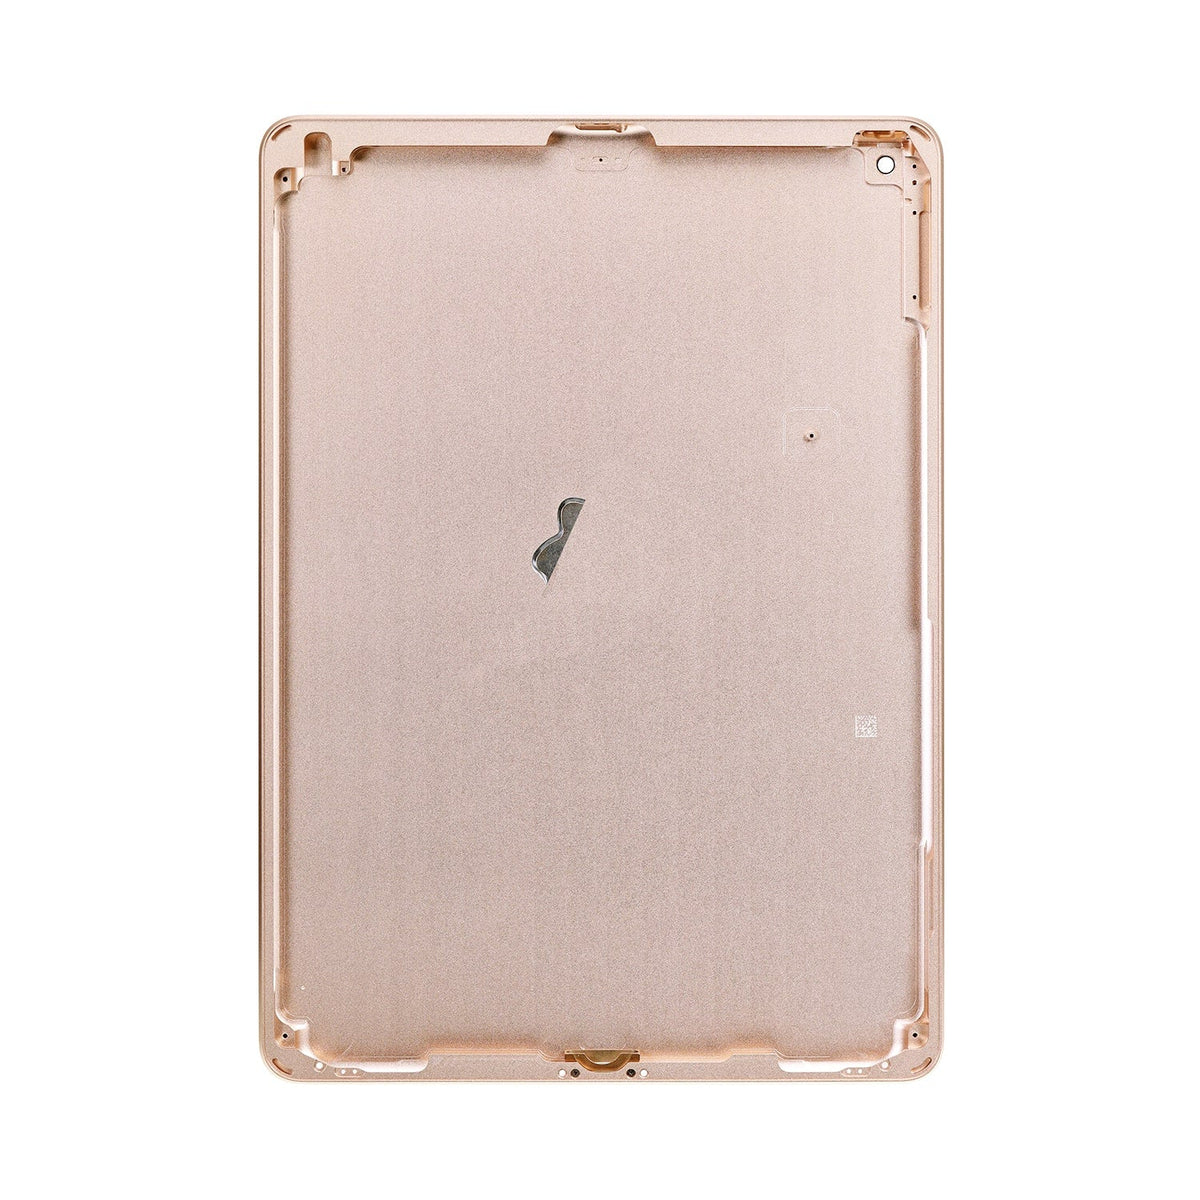 GOLD BACK COVER (WIFI VERSION ) FOR IPAD 5